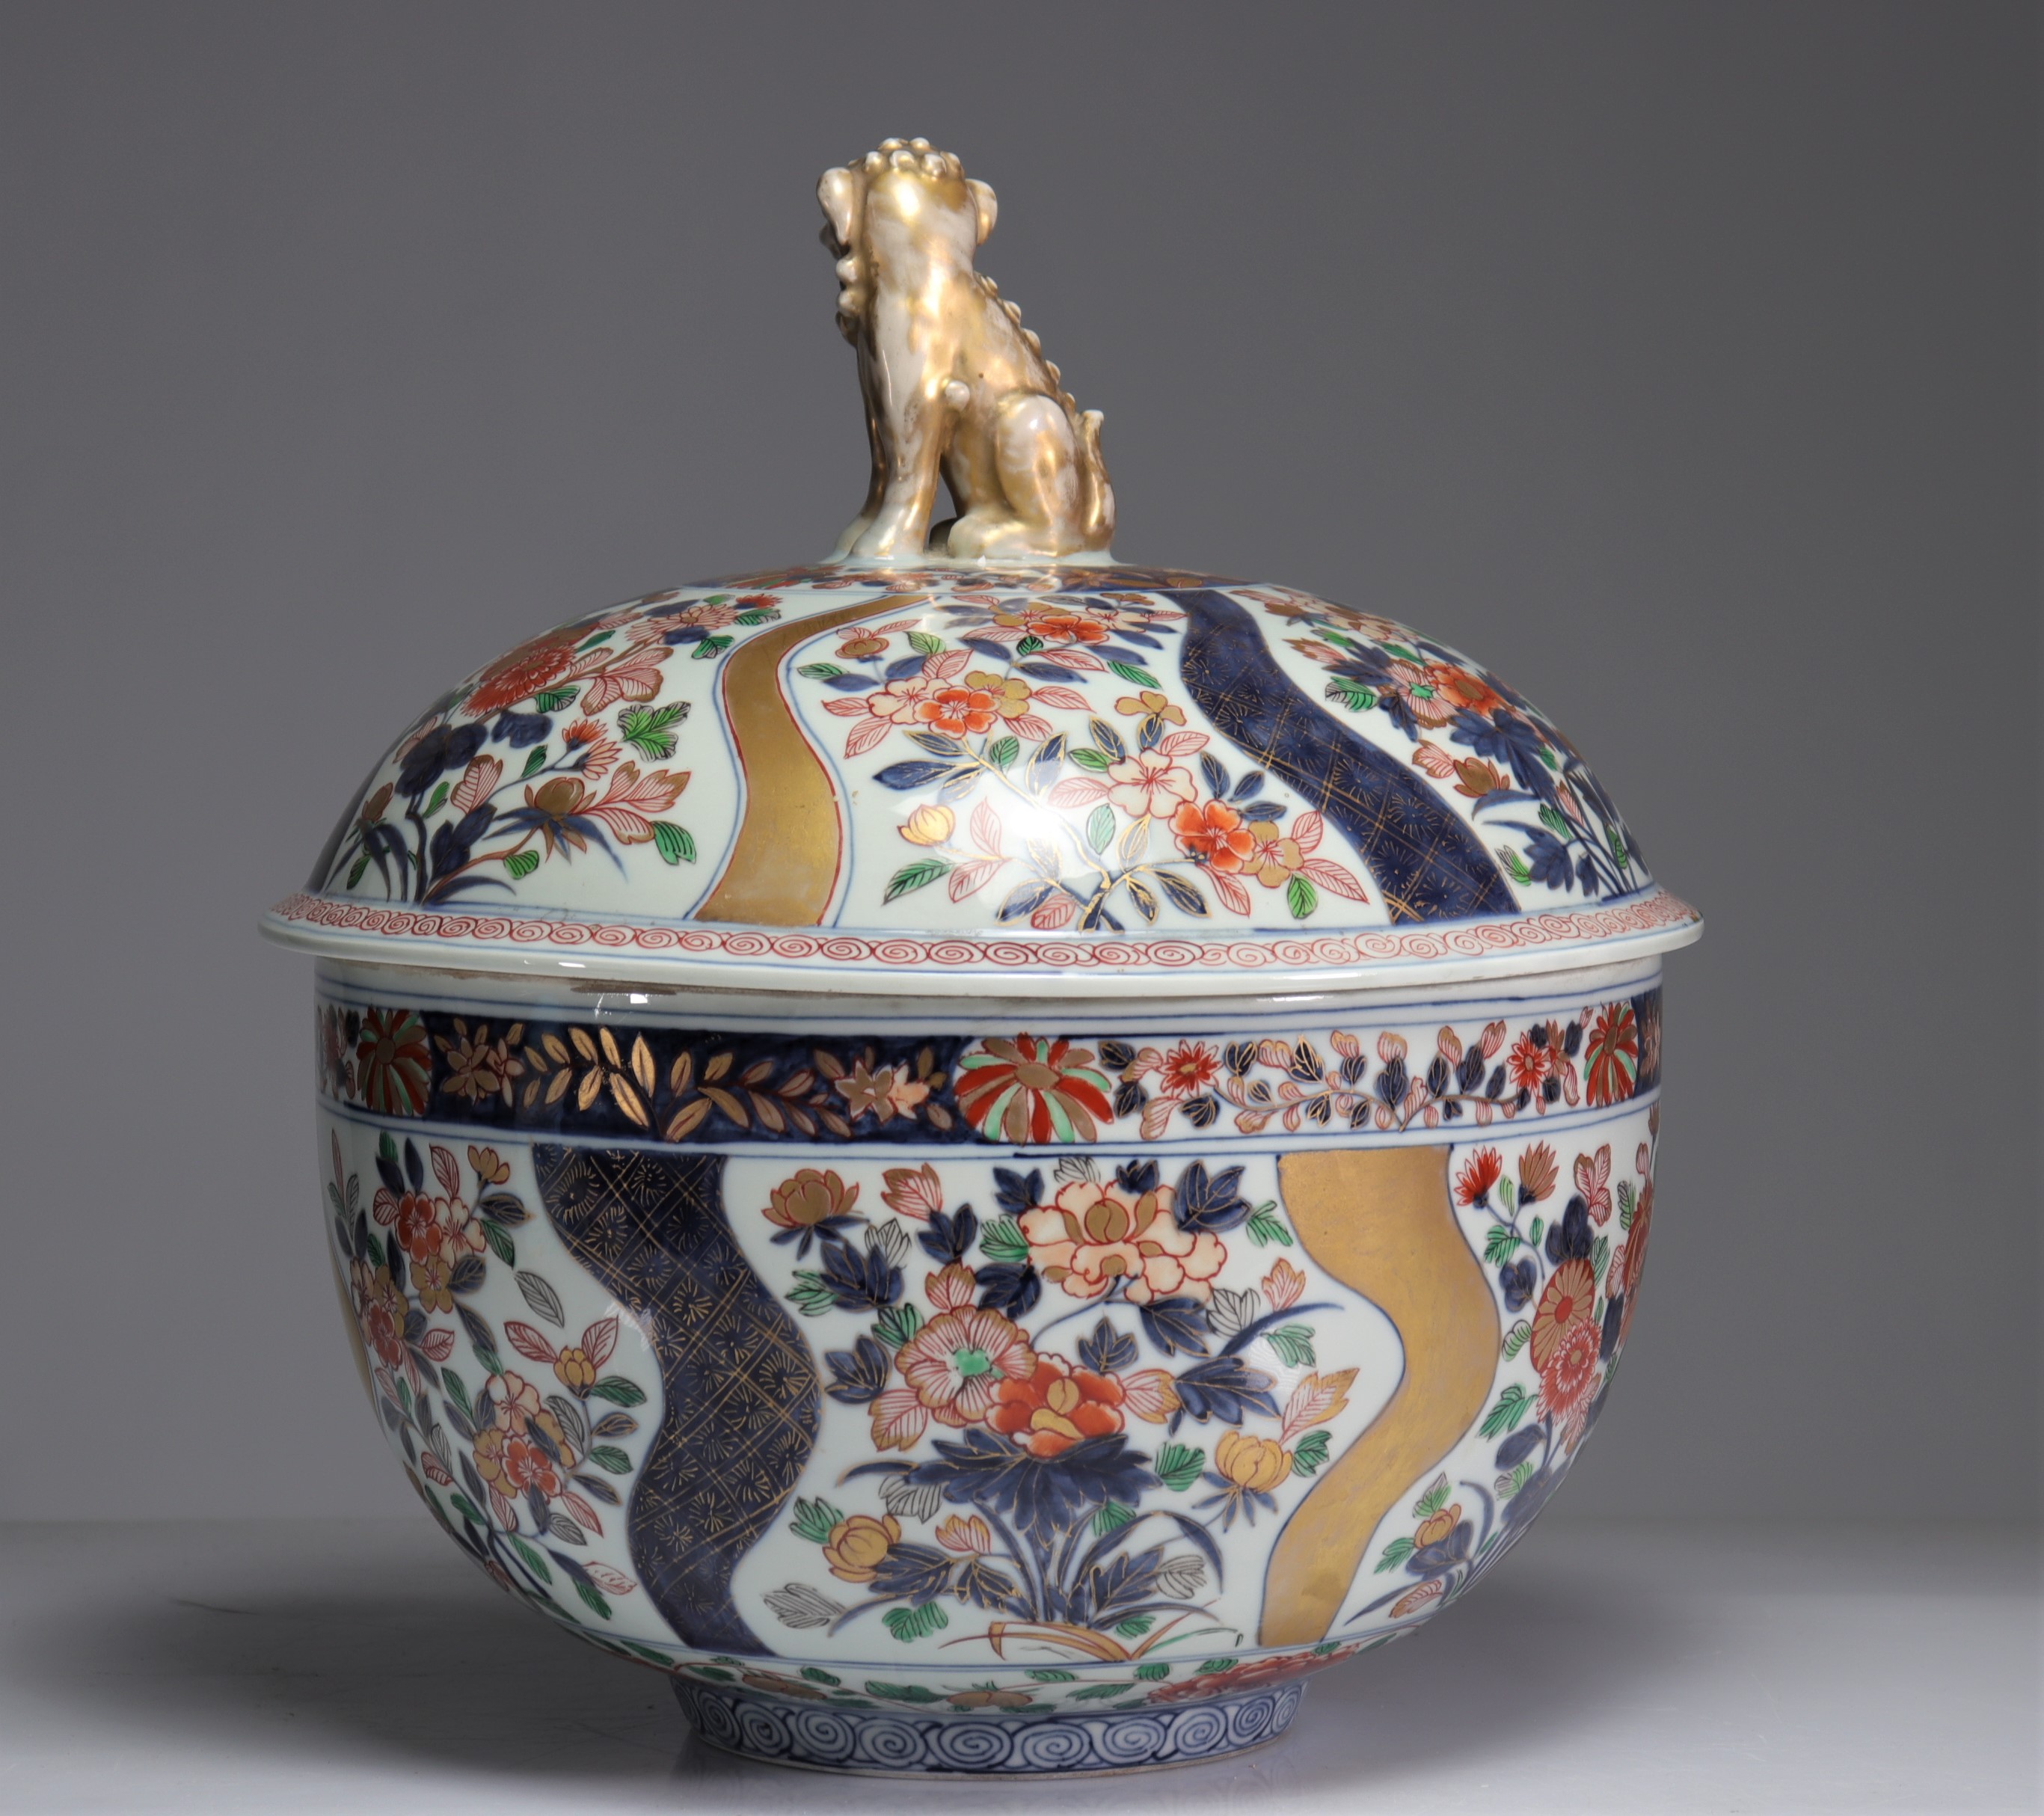 Imposing covered bowl in 18th century Japanese porcelain - Image 3 of 7